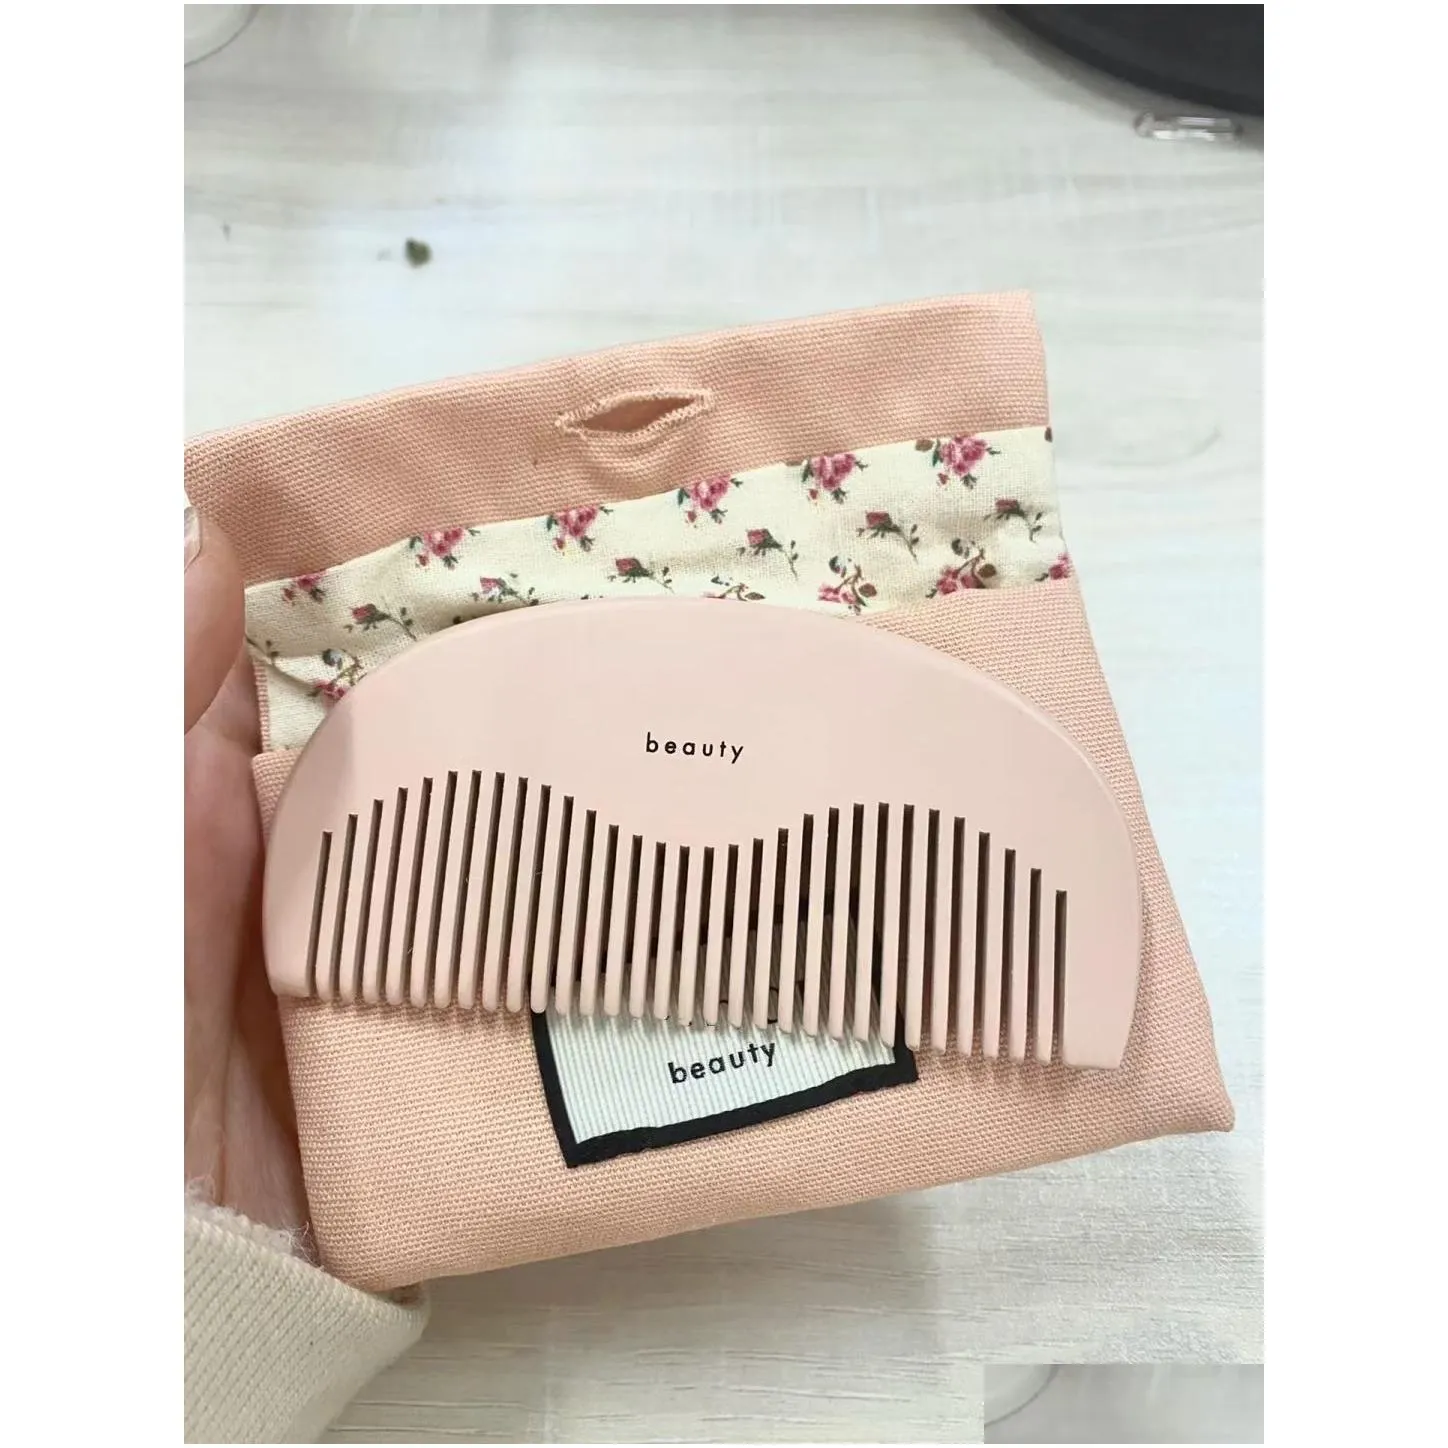 Brand Beauty Comb With Dust Bag For Makeup Hair Brushes Portable Mini Pink Combs Cosmetics Hair Care Styling Tools